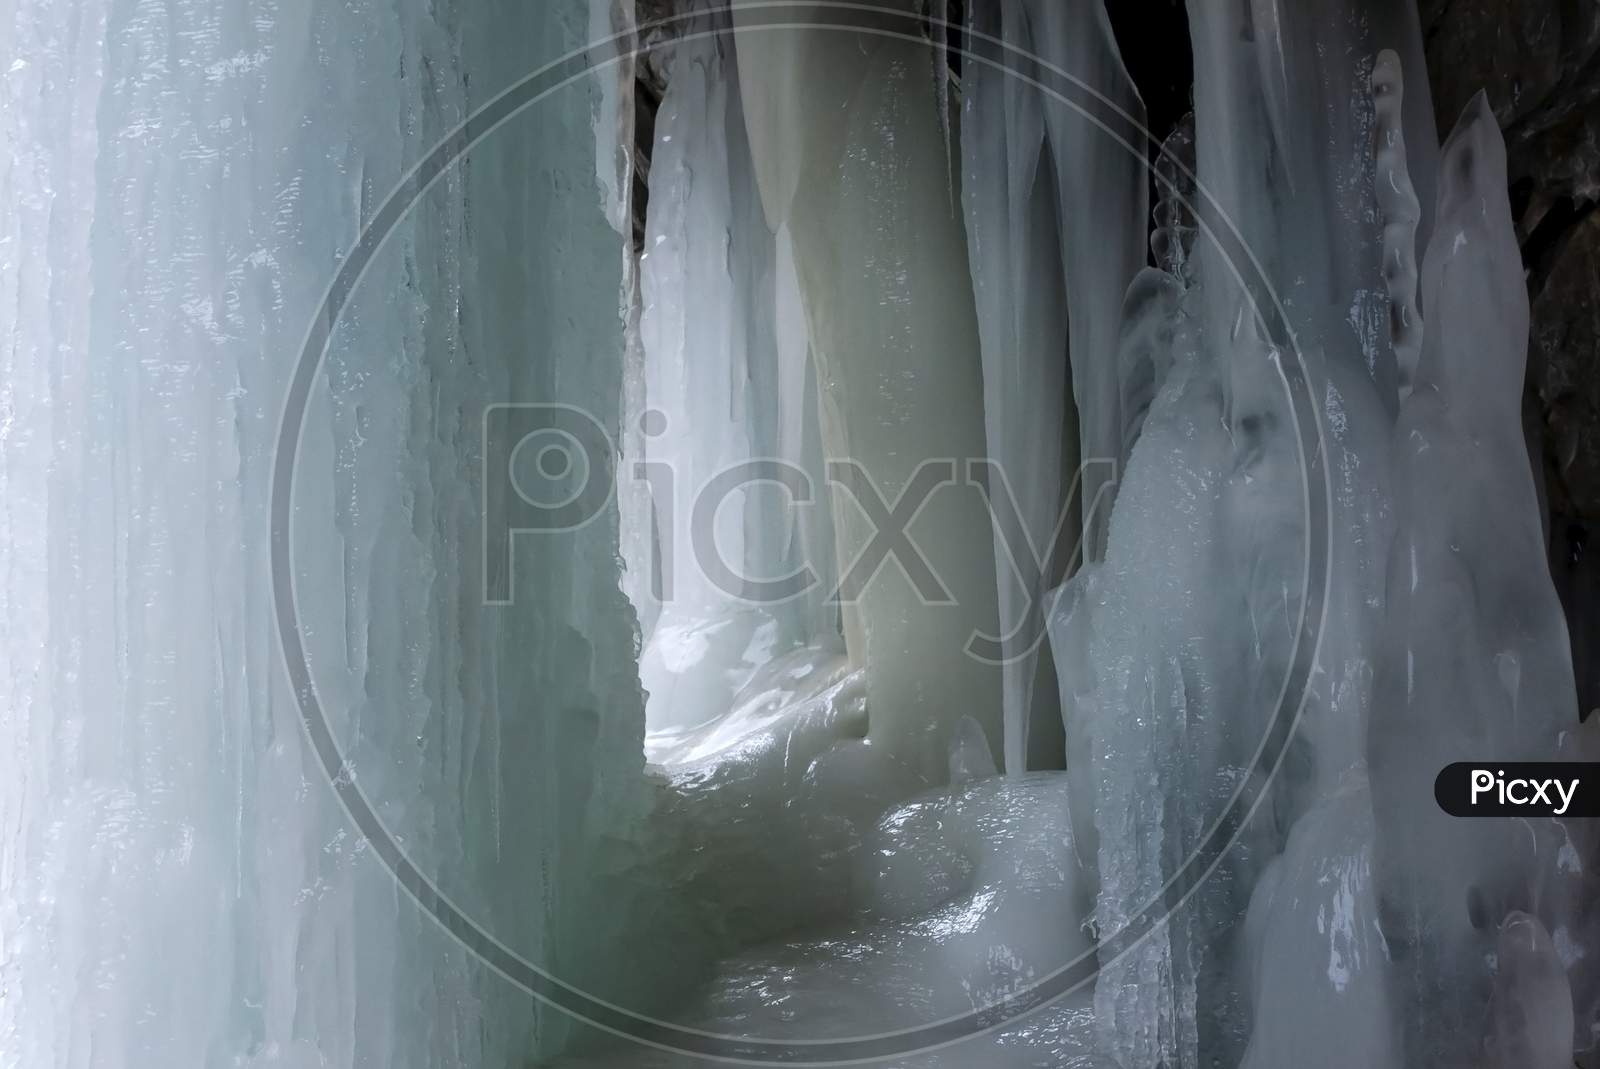 A High Altitude Frozen Water Fall With Several Patterns Of Icicles In Ladakh In India